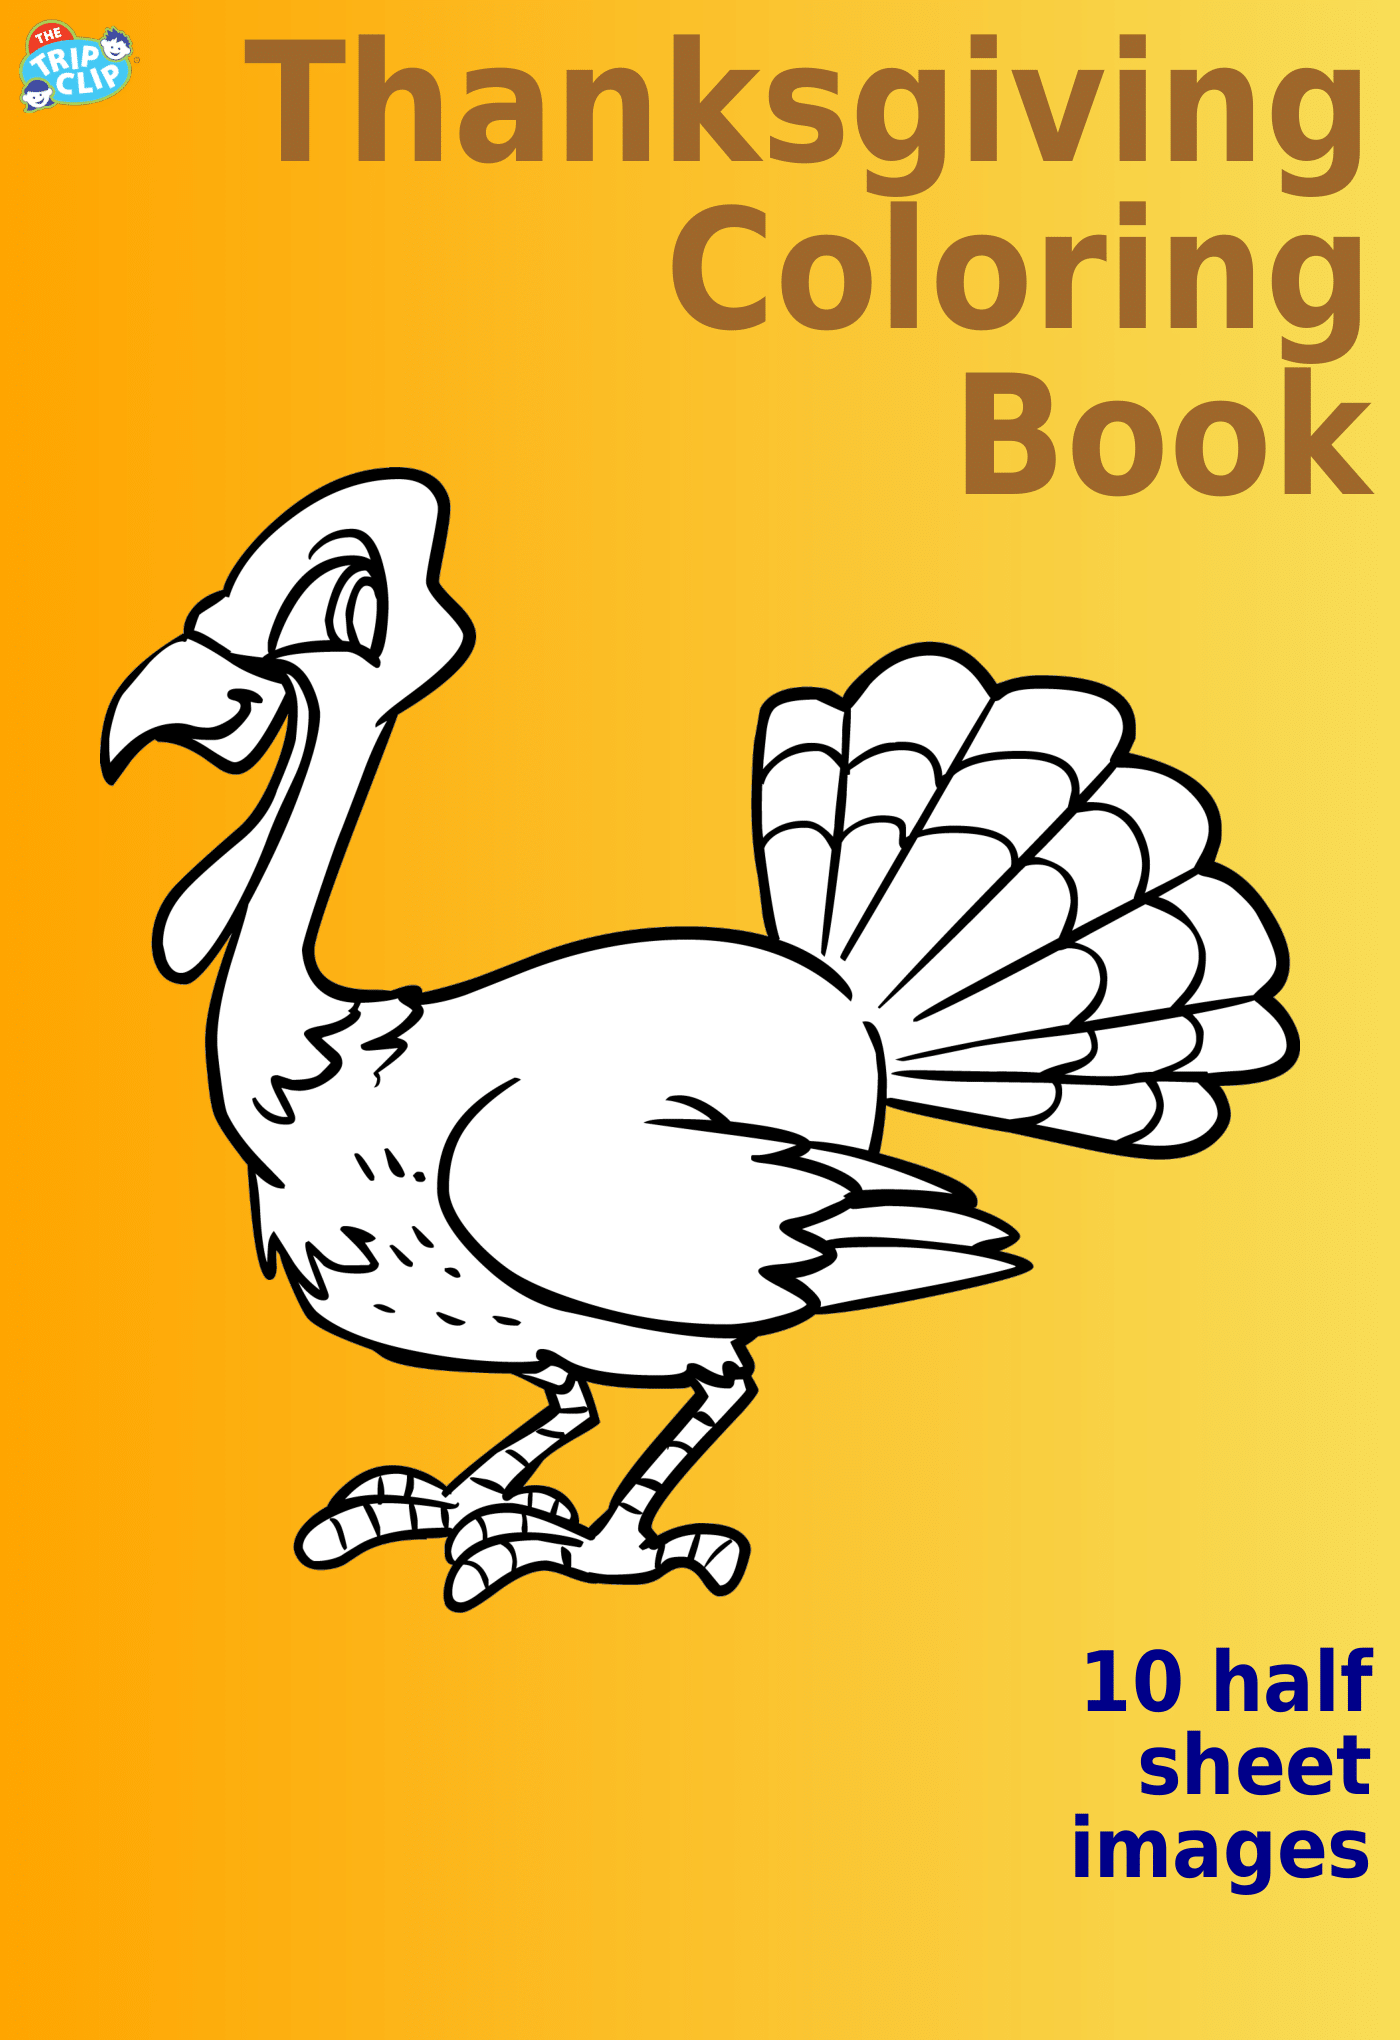 Thanksgiving coloring book with 10 themed pictures